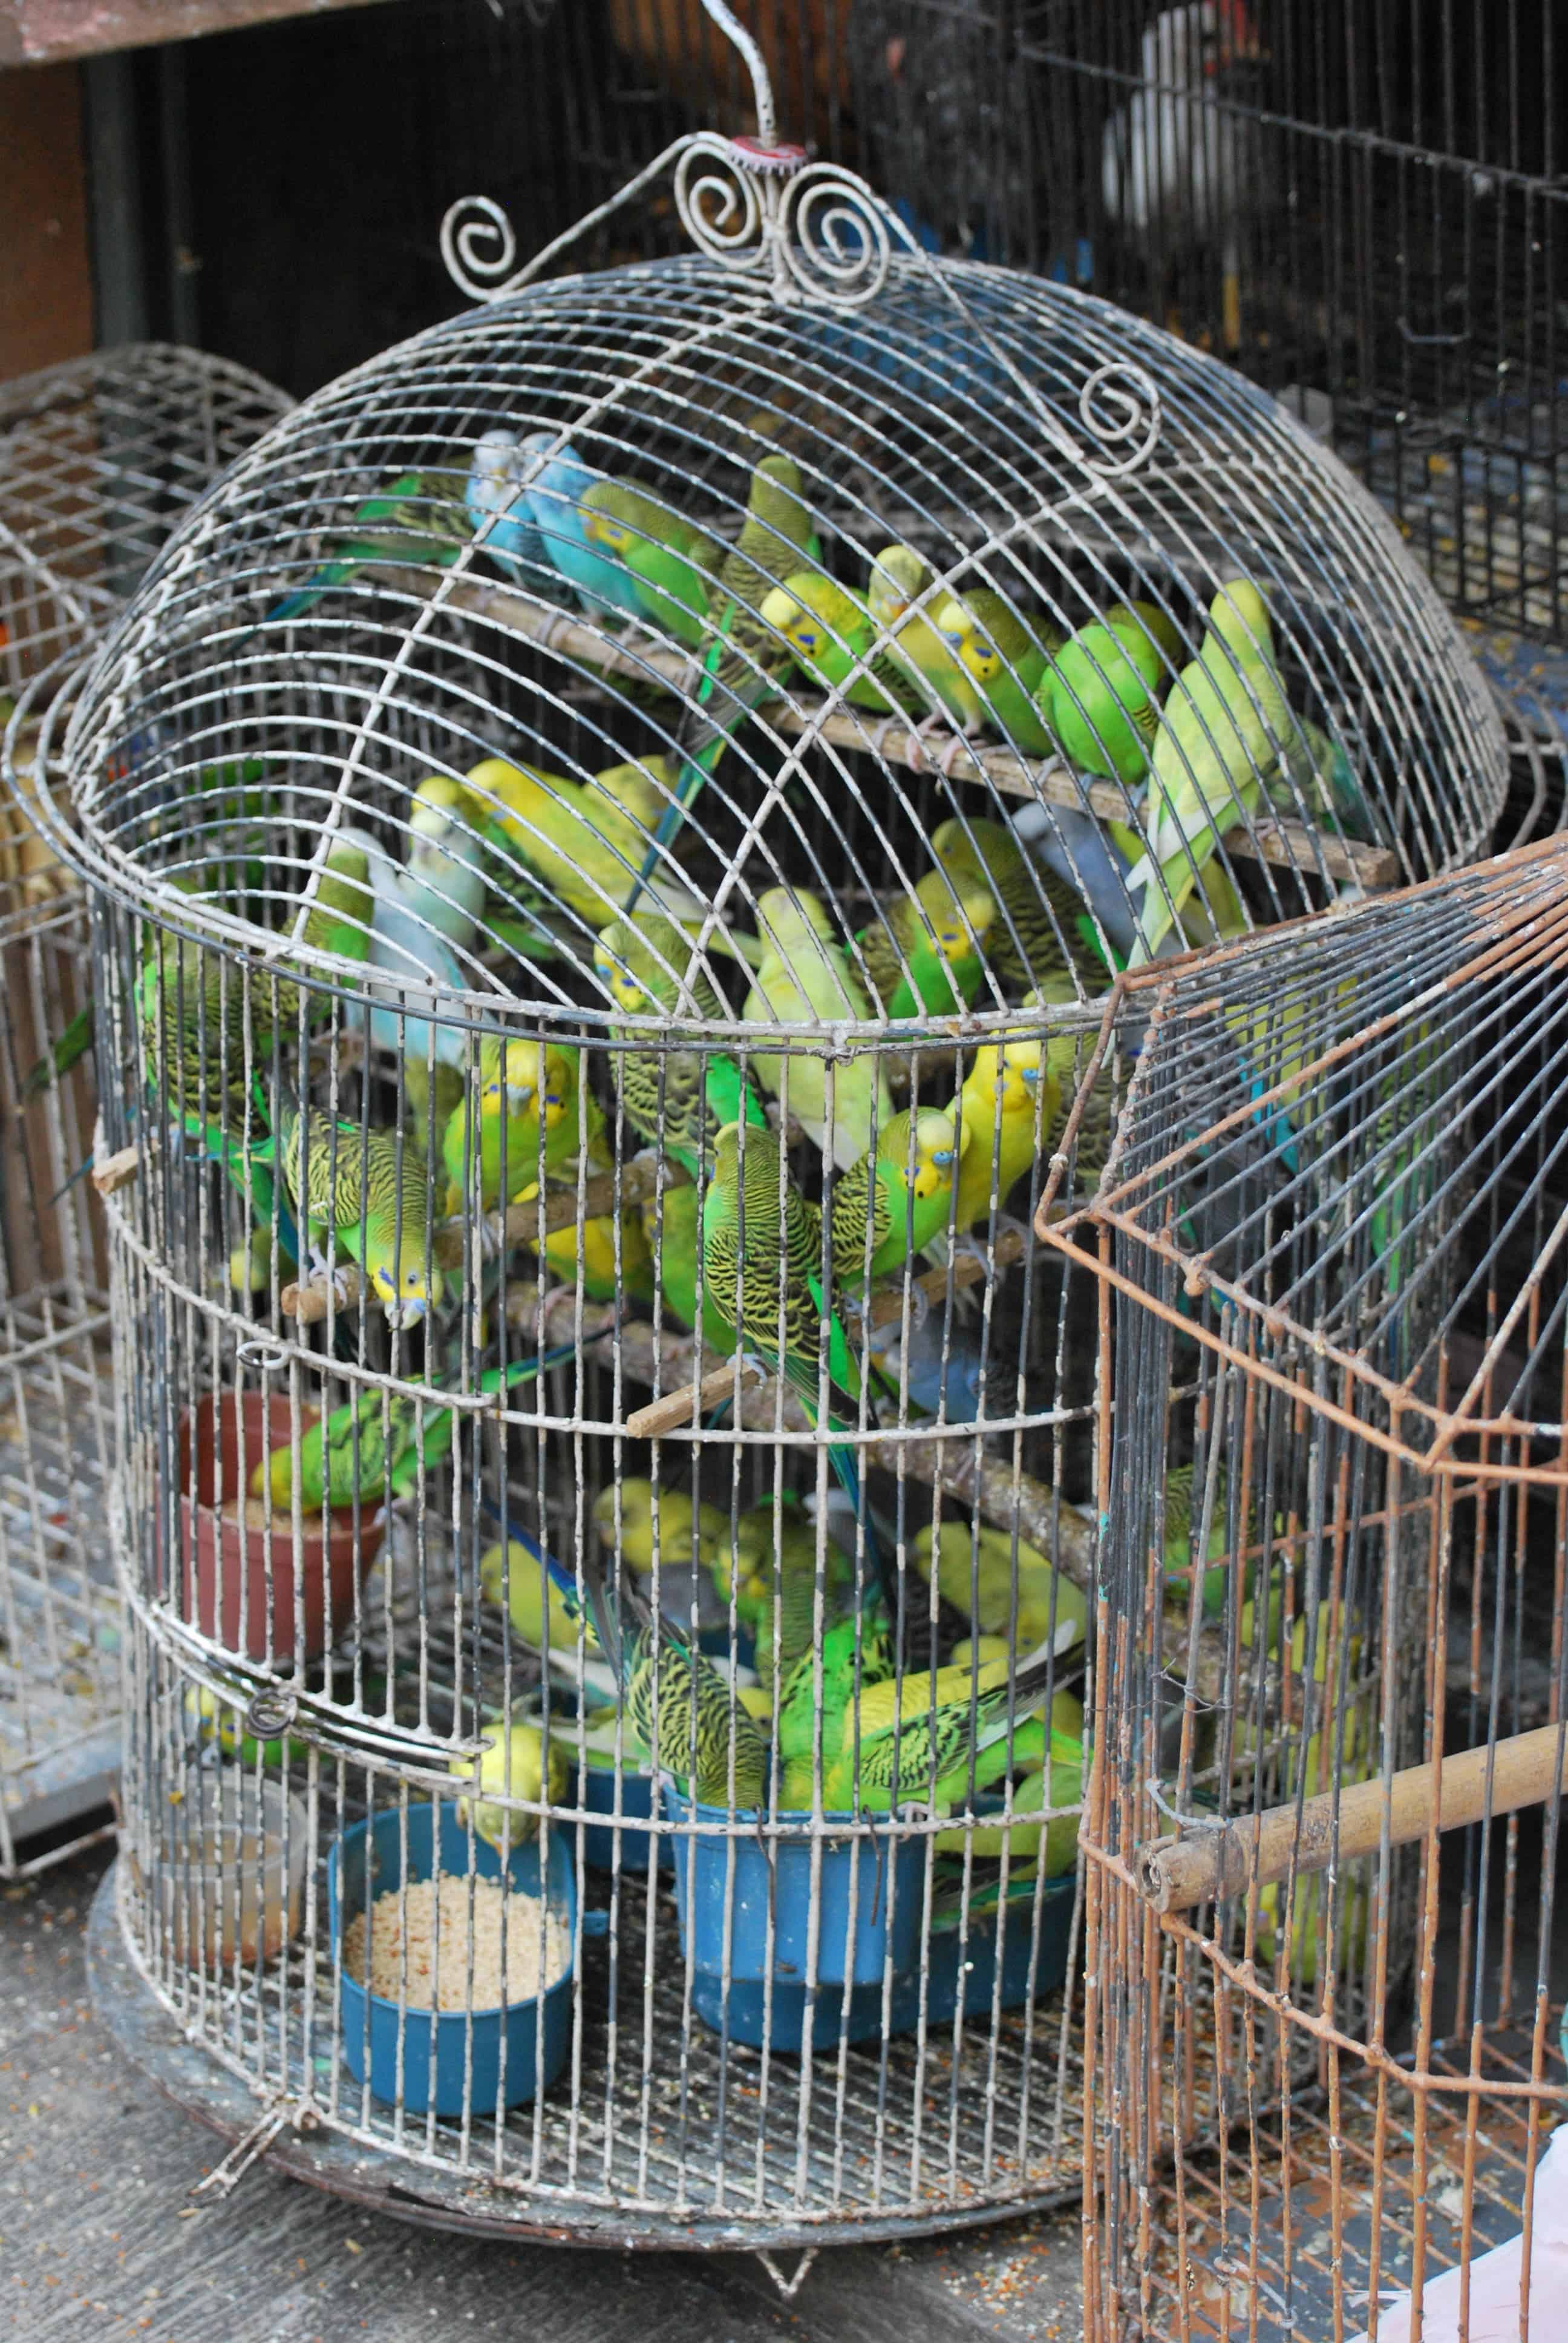 Cramped wild birds being sold in Indonesia. Image credits: Krotz.